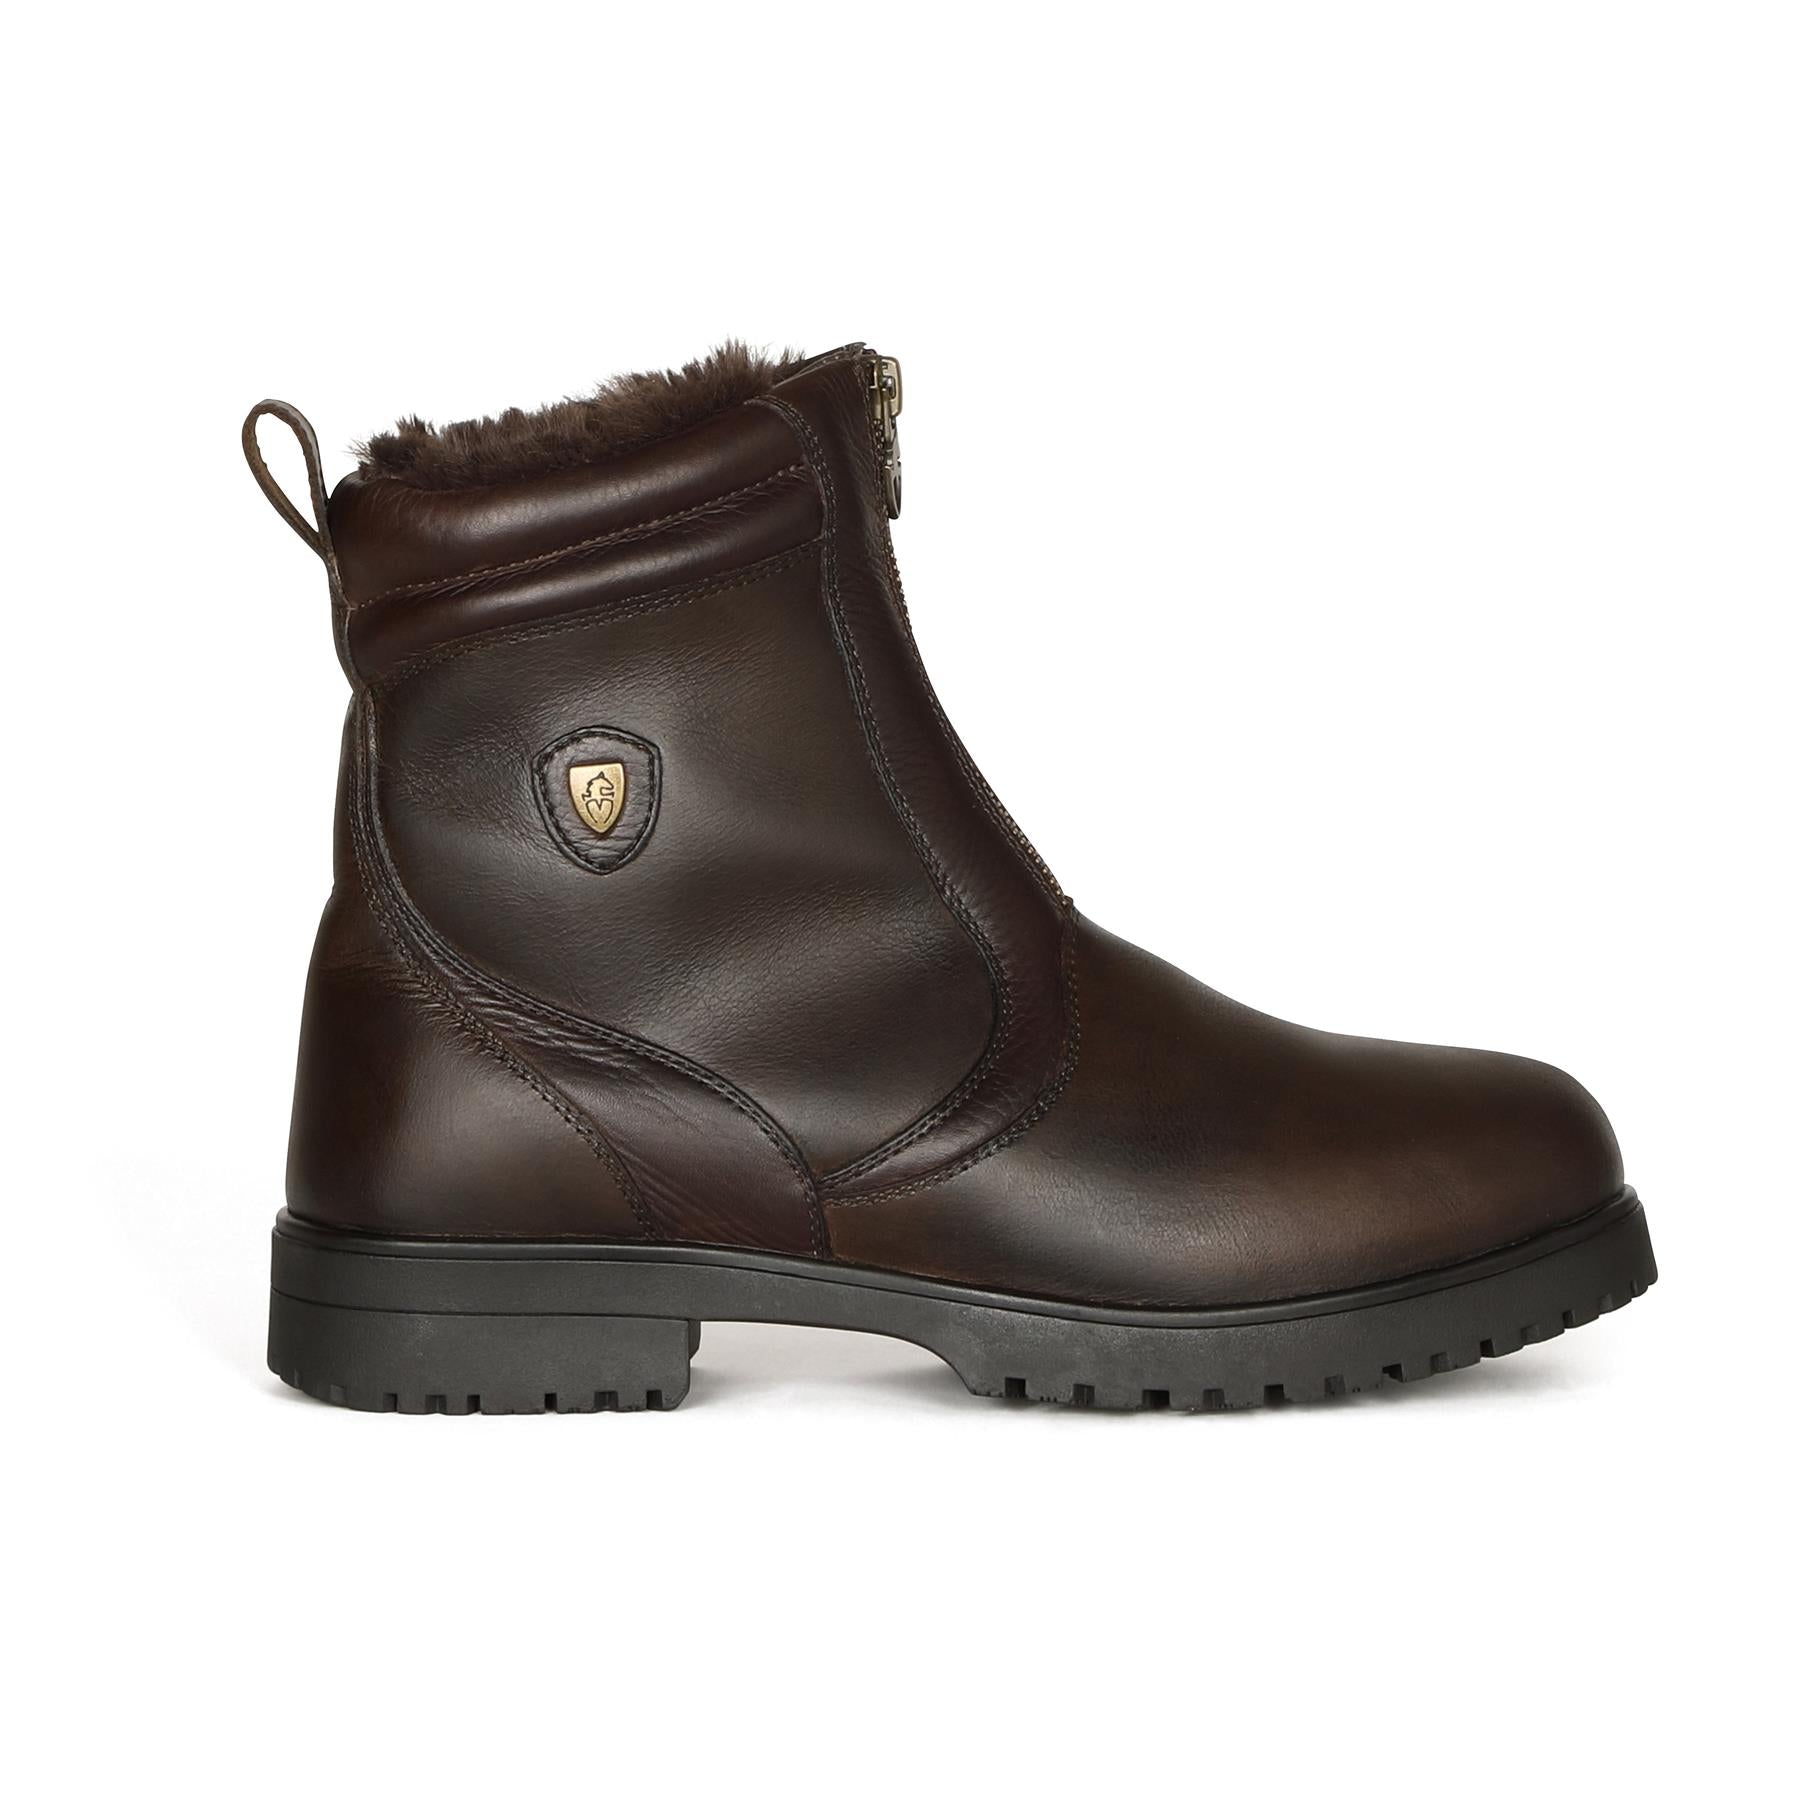 Moretta Atri Zip Country Boots - Just Horse Riders